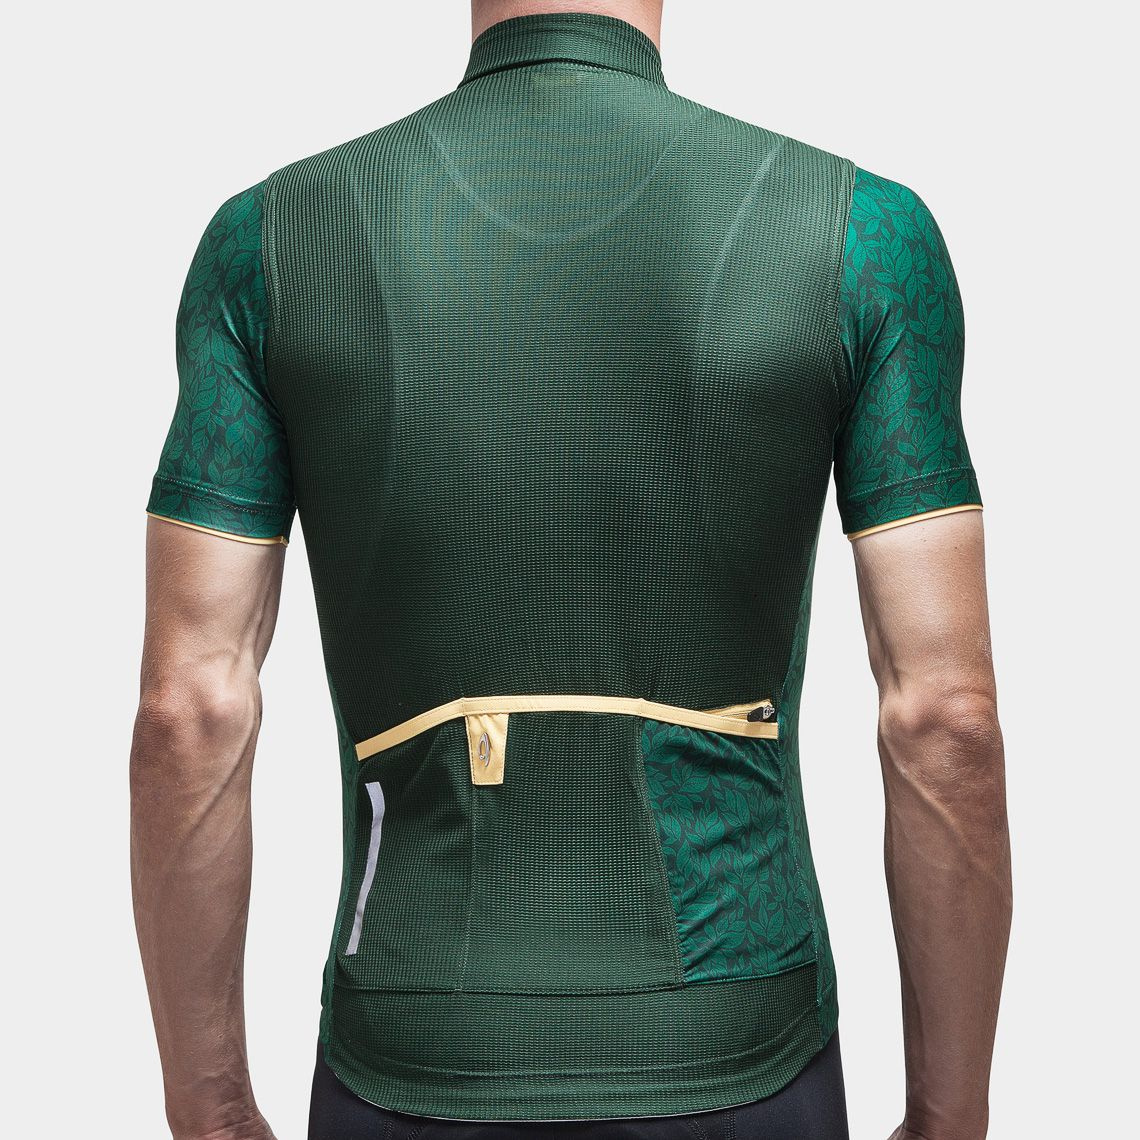 SG Xtreme Skin Fit Base Layer, Buy Online India